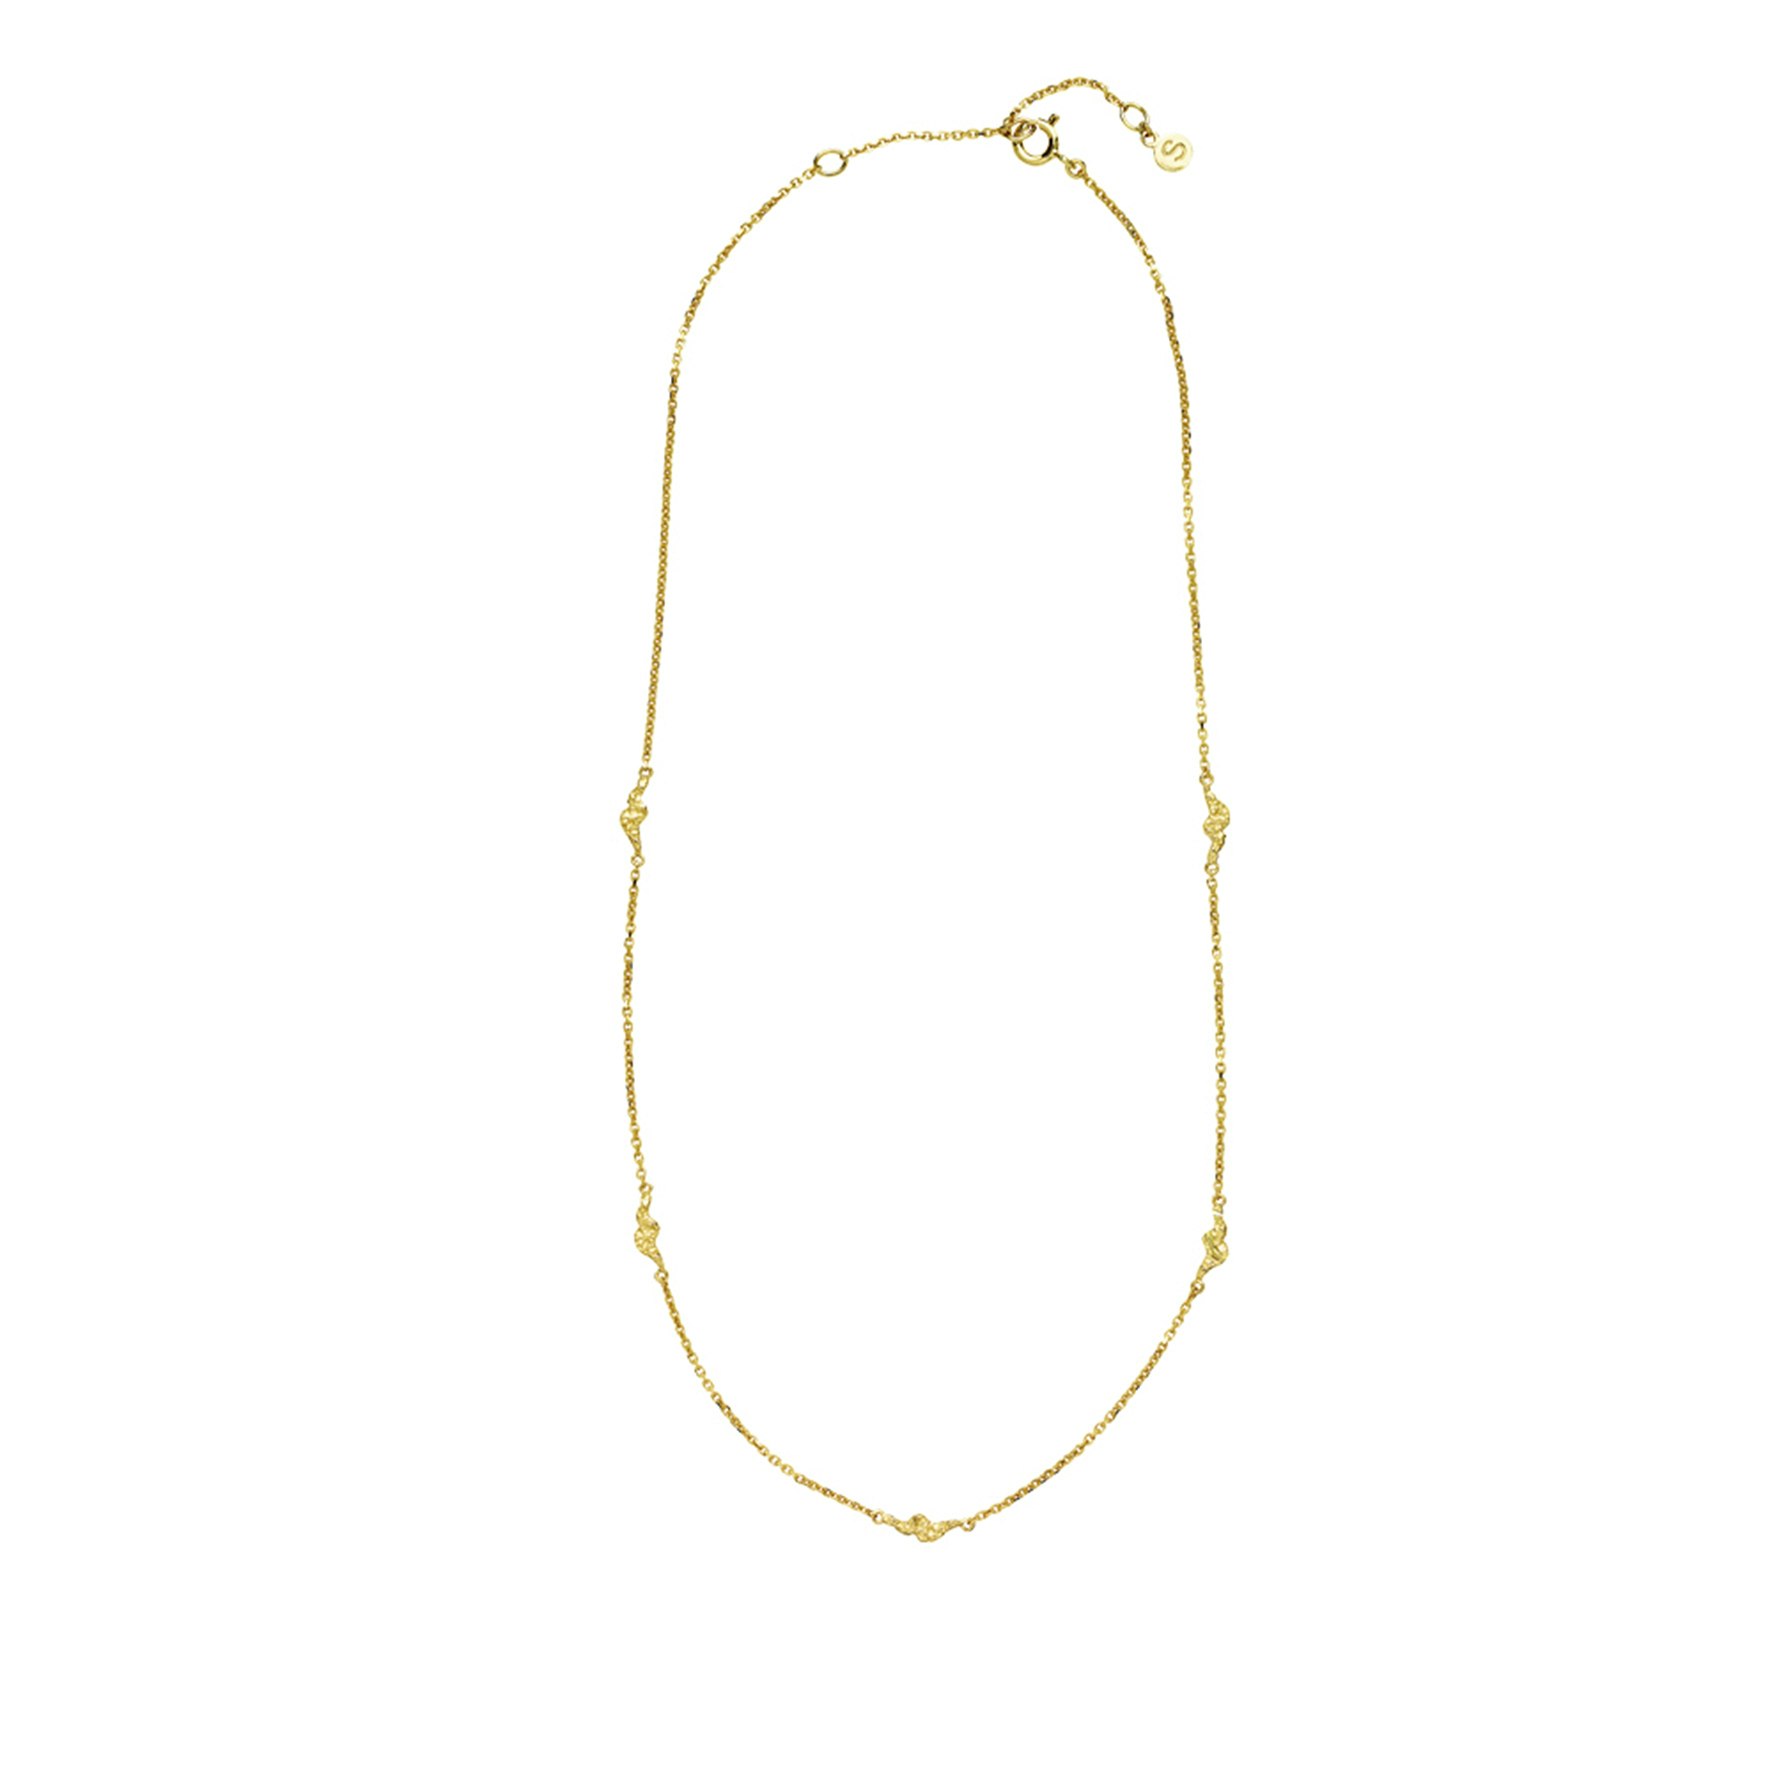 Silke By Sistie Necklace from Sistie in Goldplated Silver Sterling 925